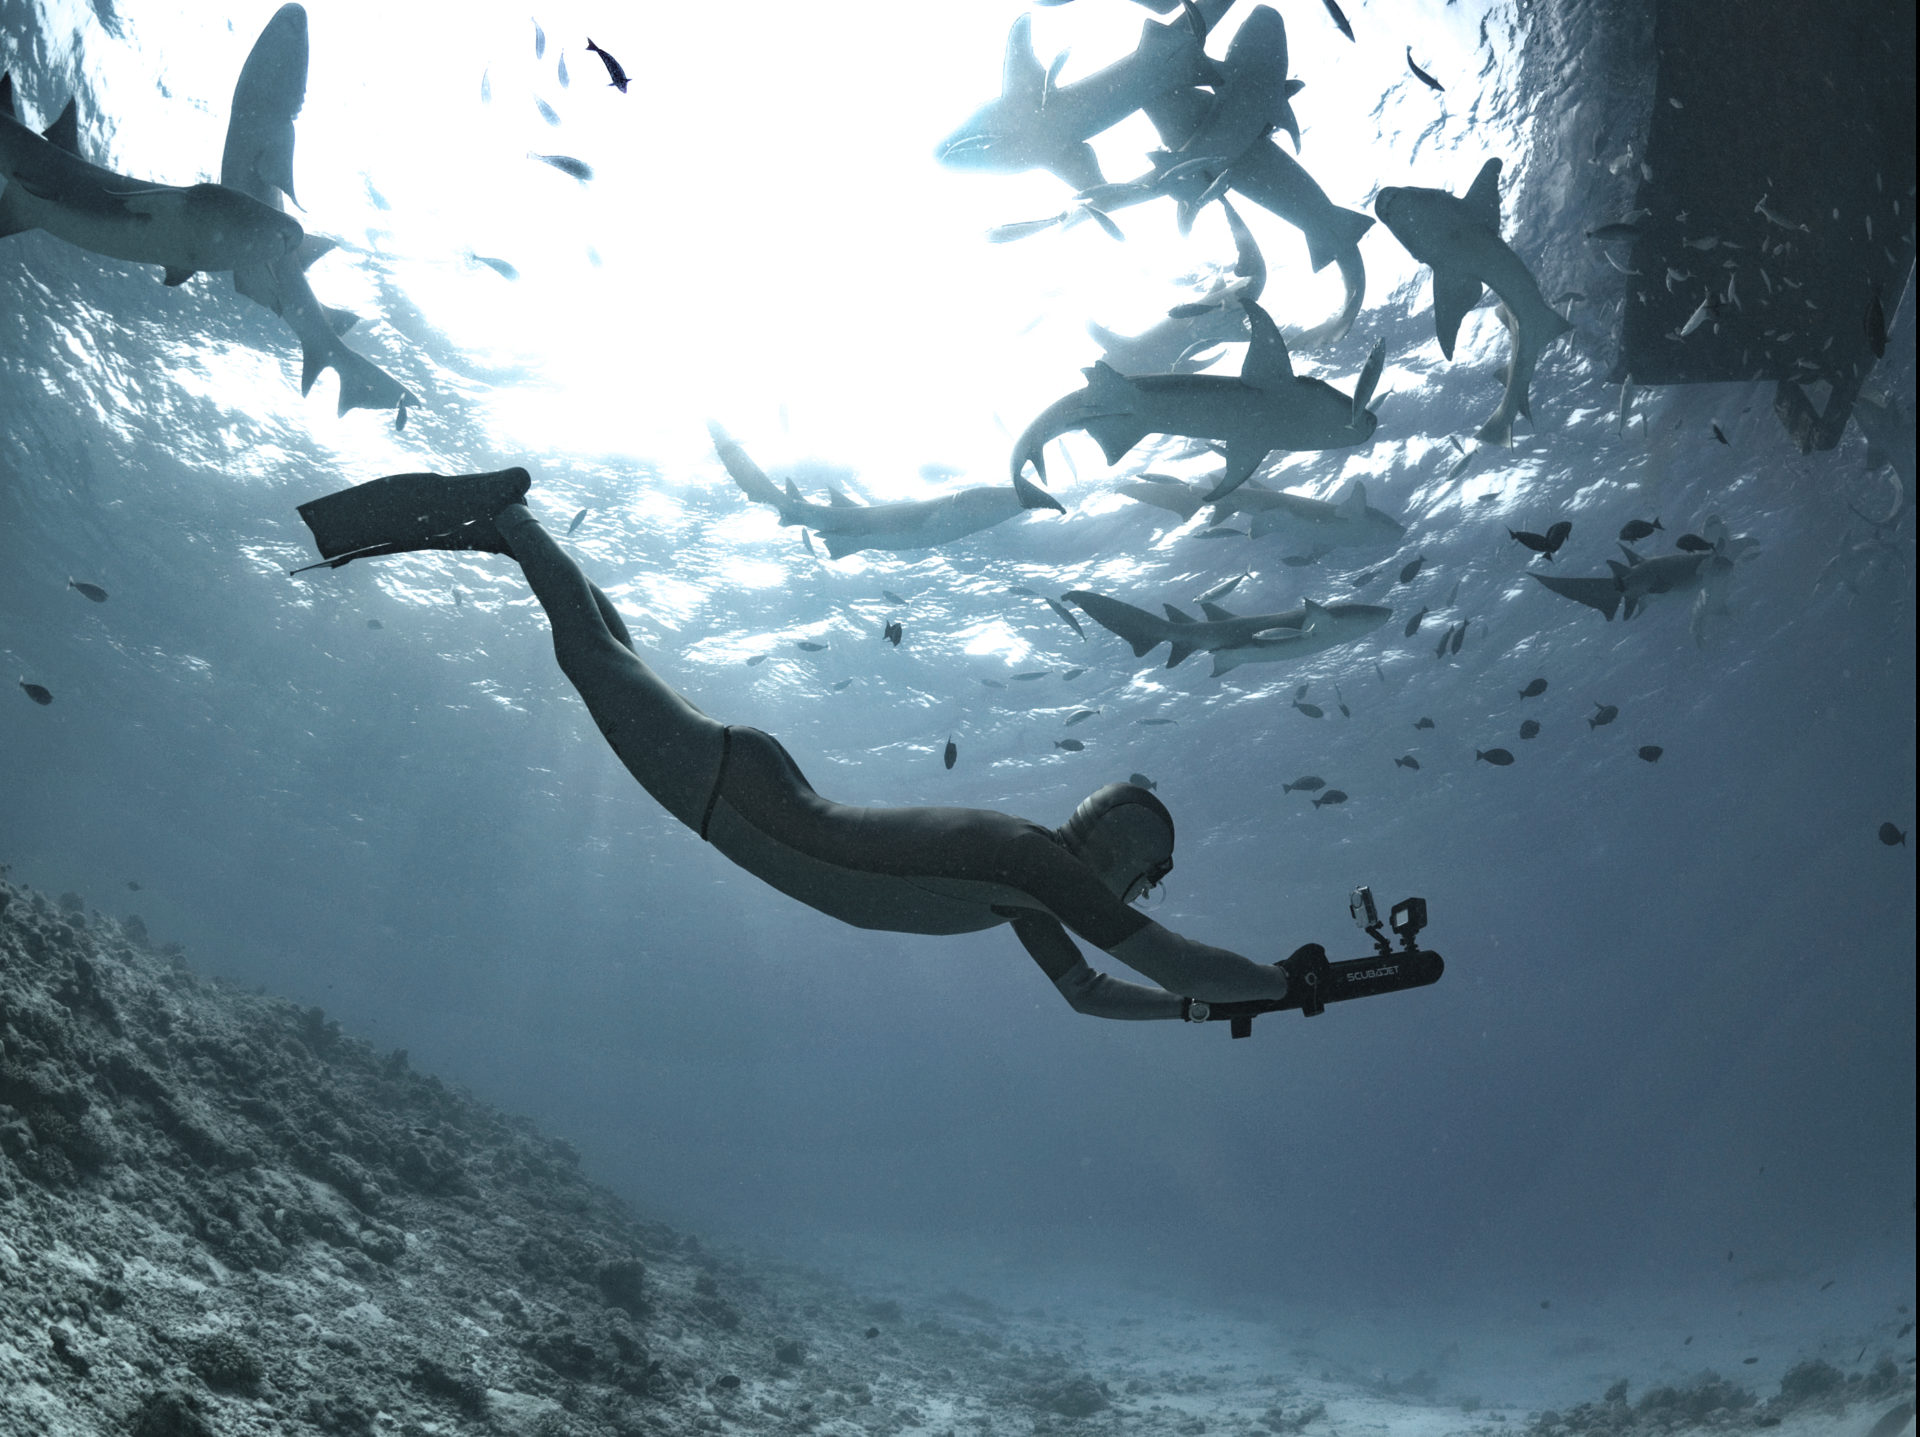 A word with freediver Herbert Nitsch